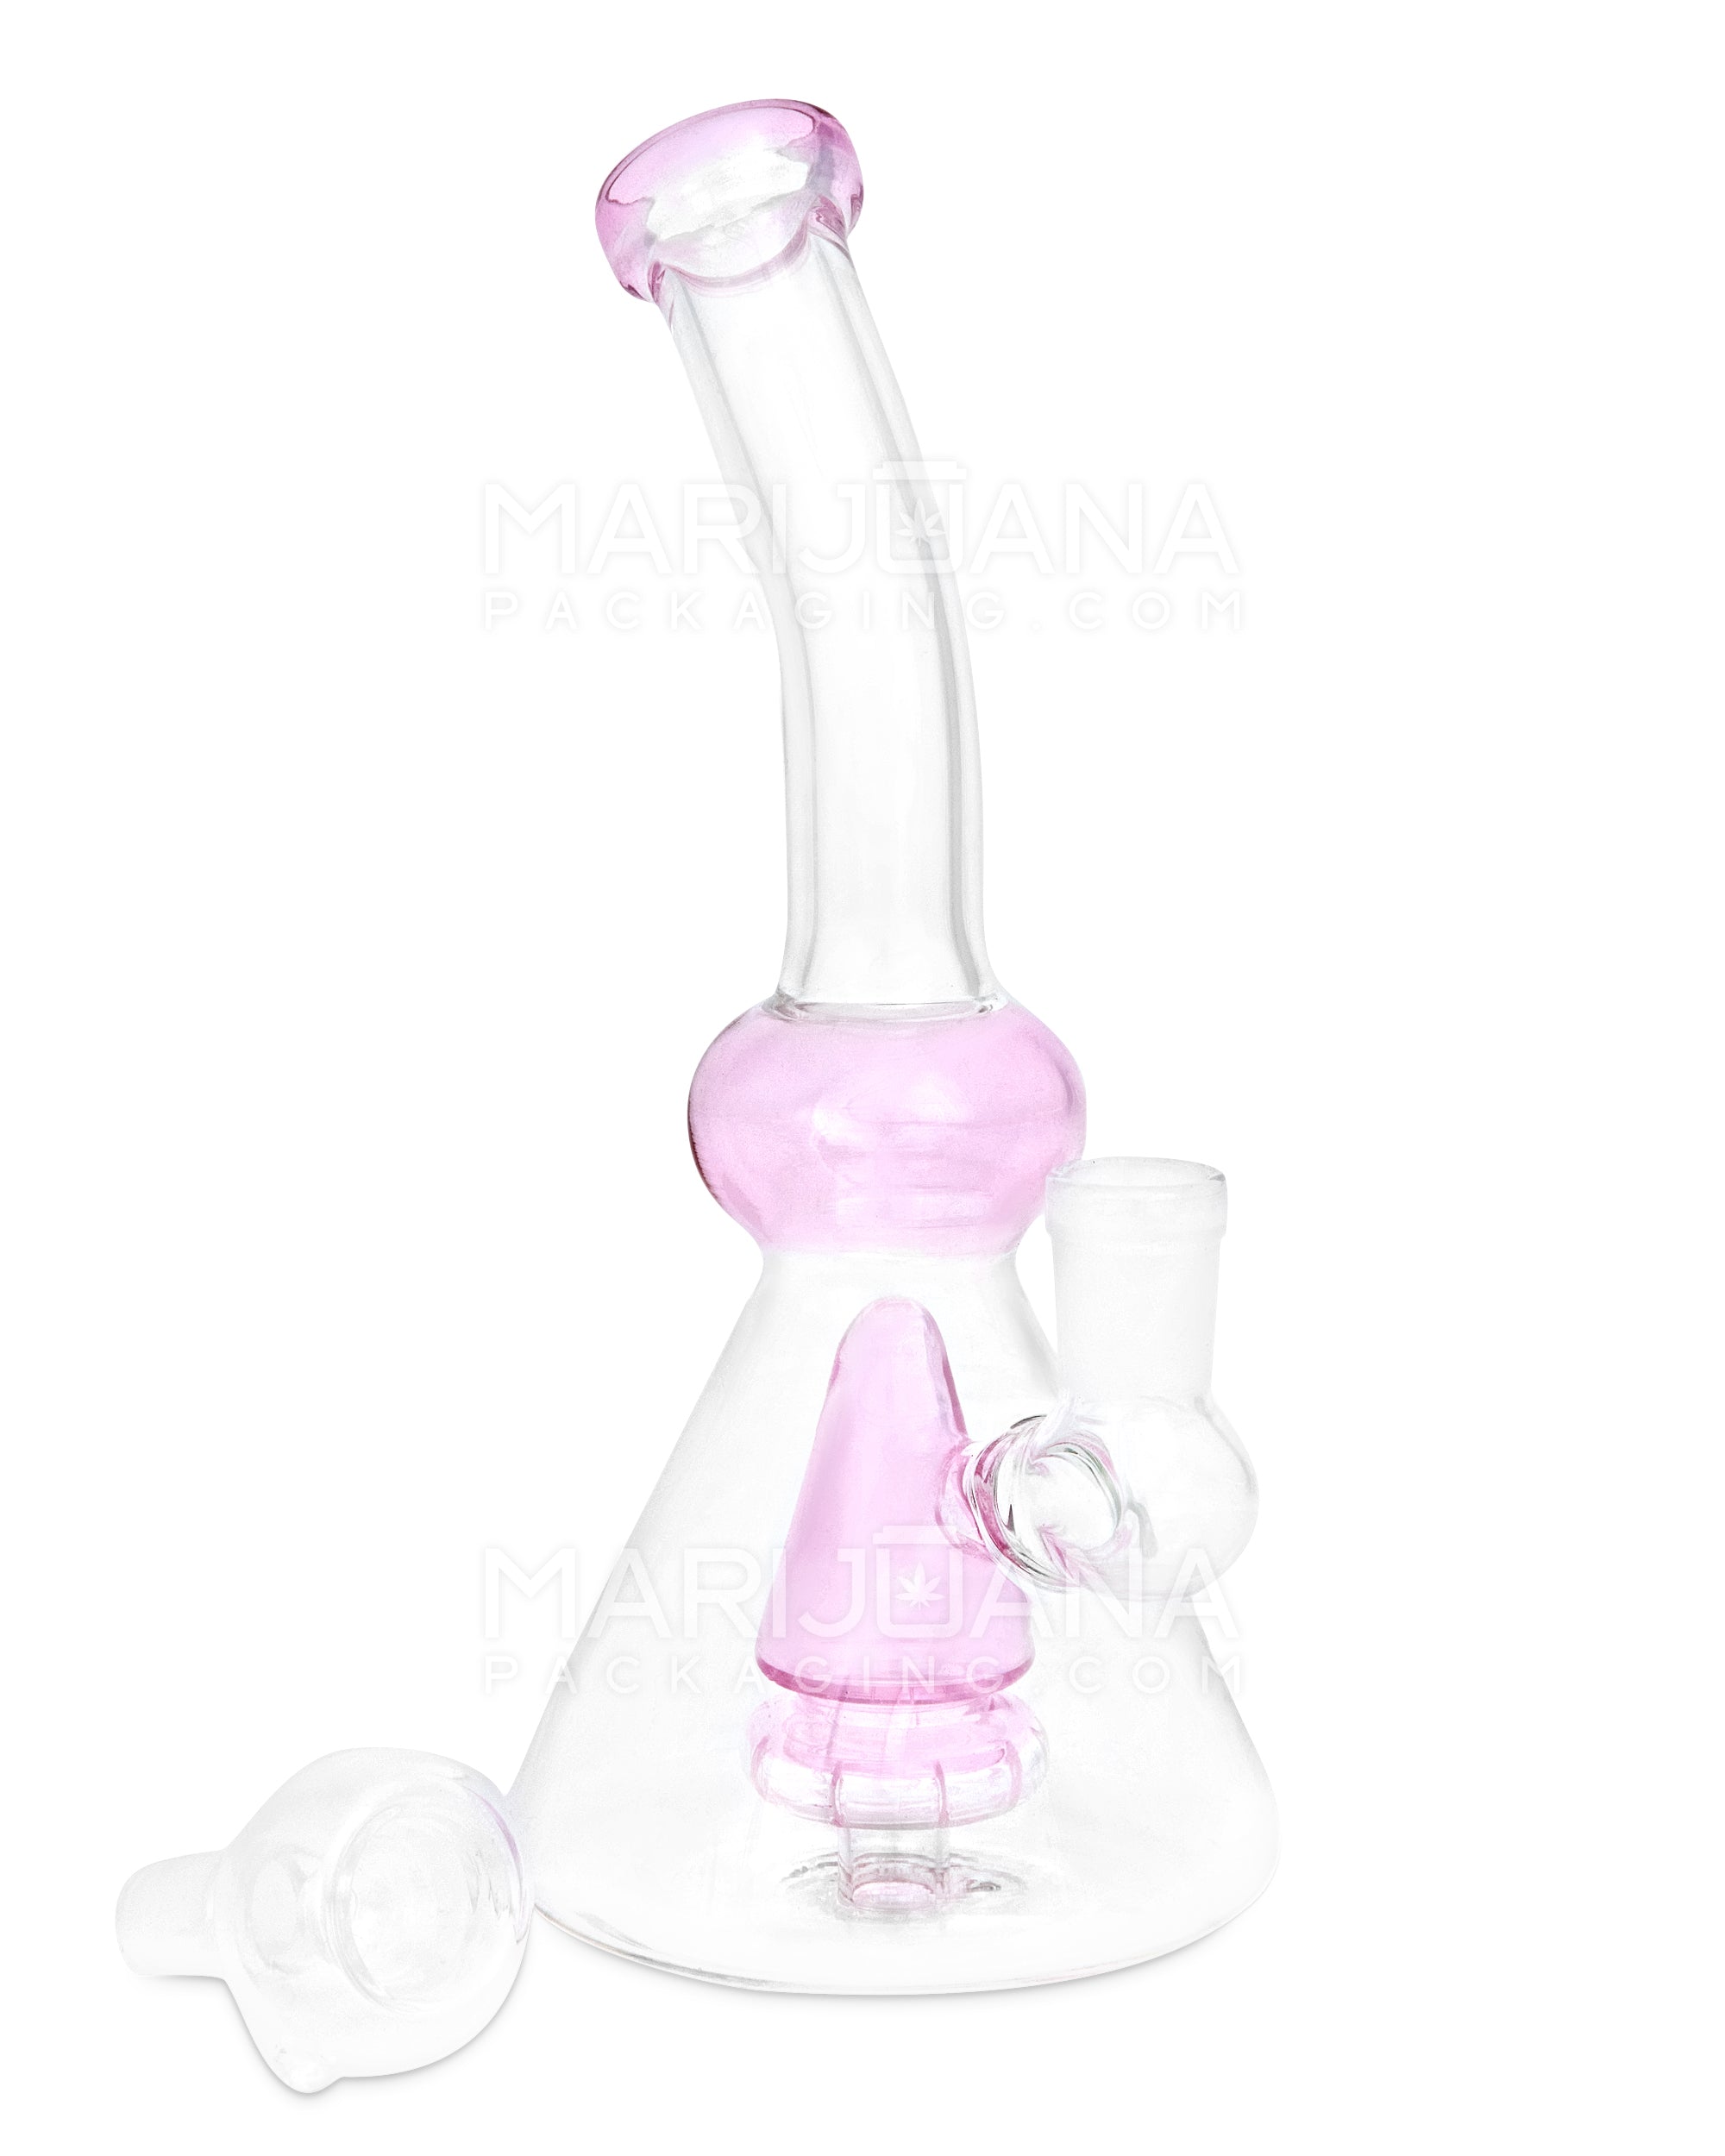 Bent Neck Showerhead Perc Glass Beaker Water Pipe | 7in Tall - 14mm Bowl - Pink - 2